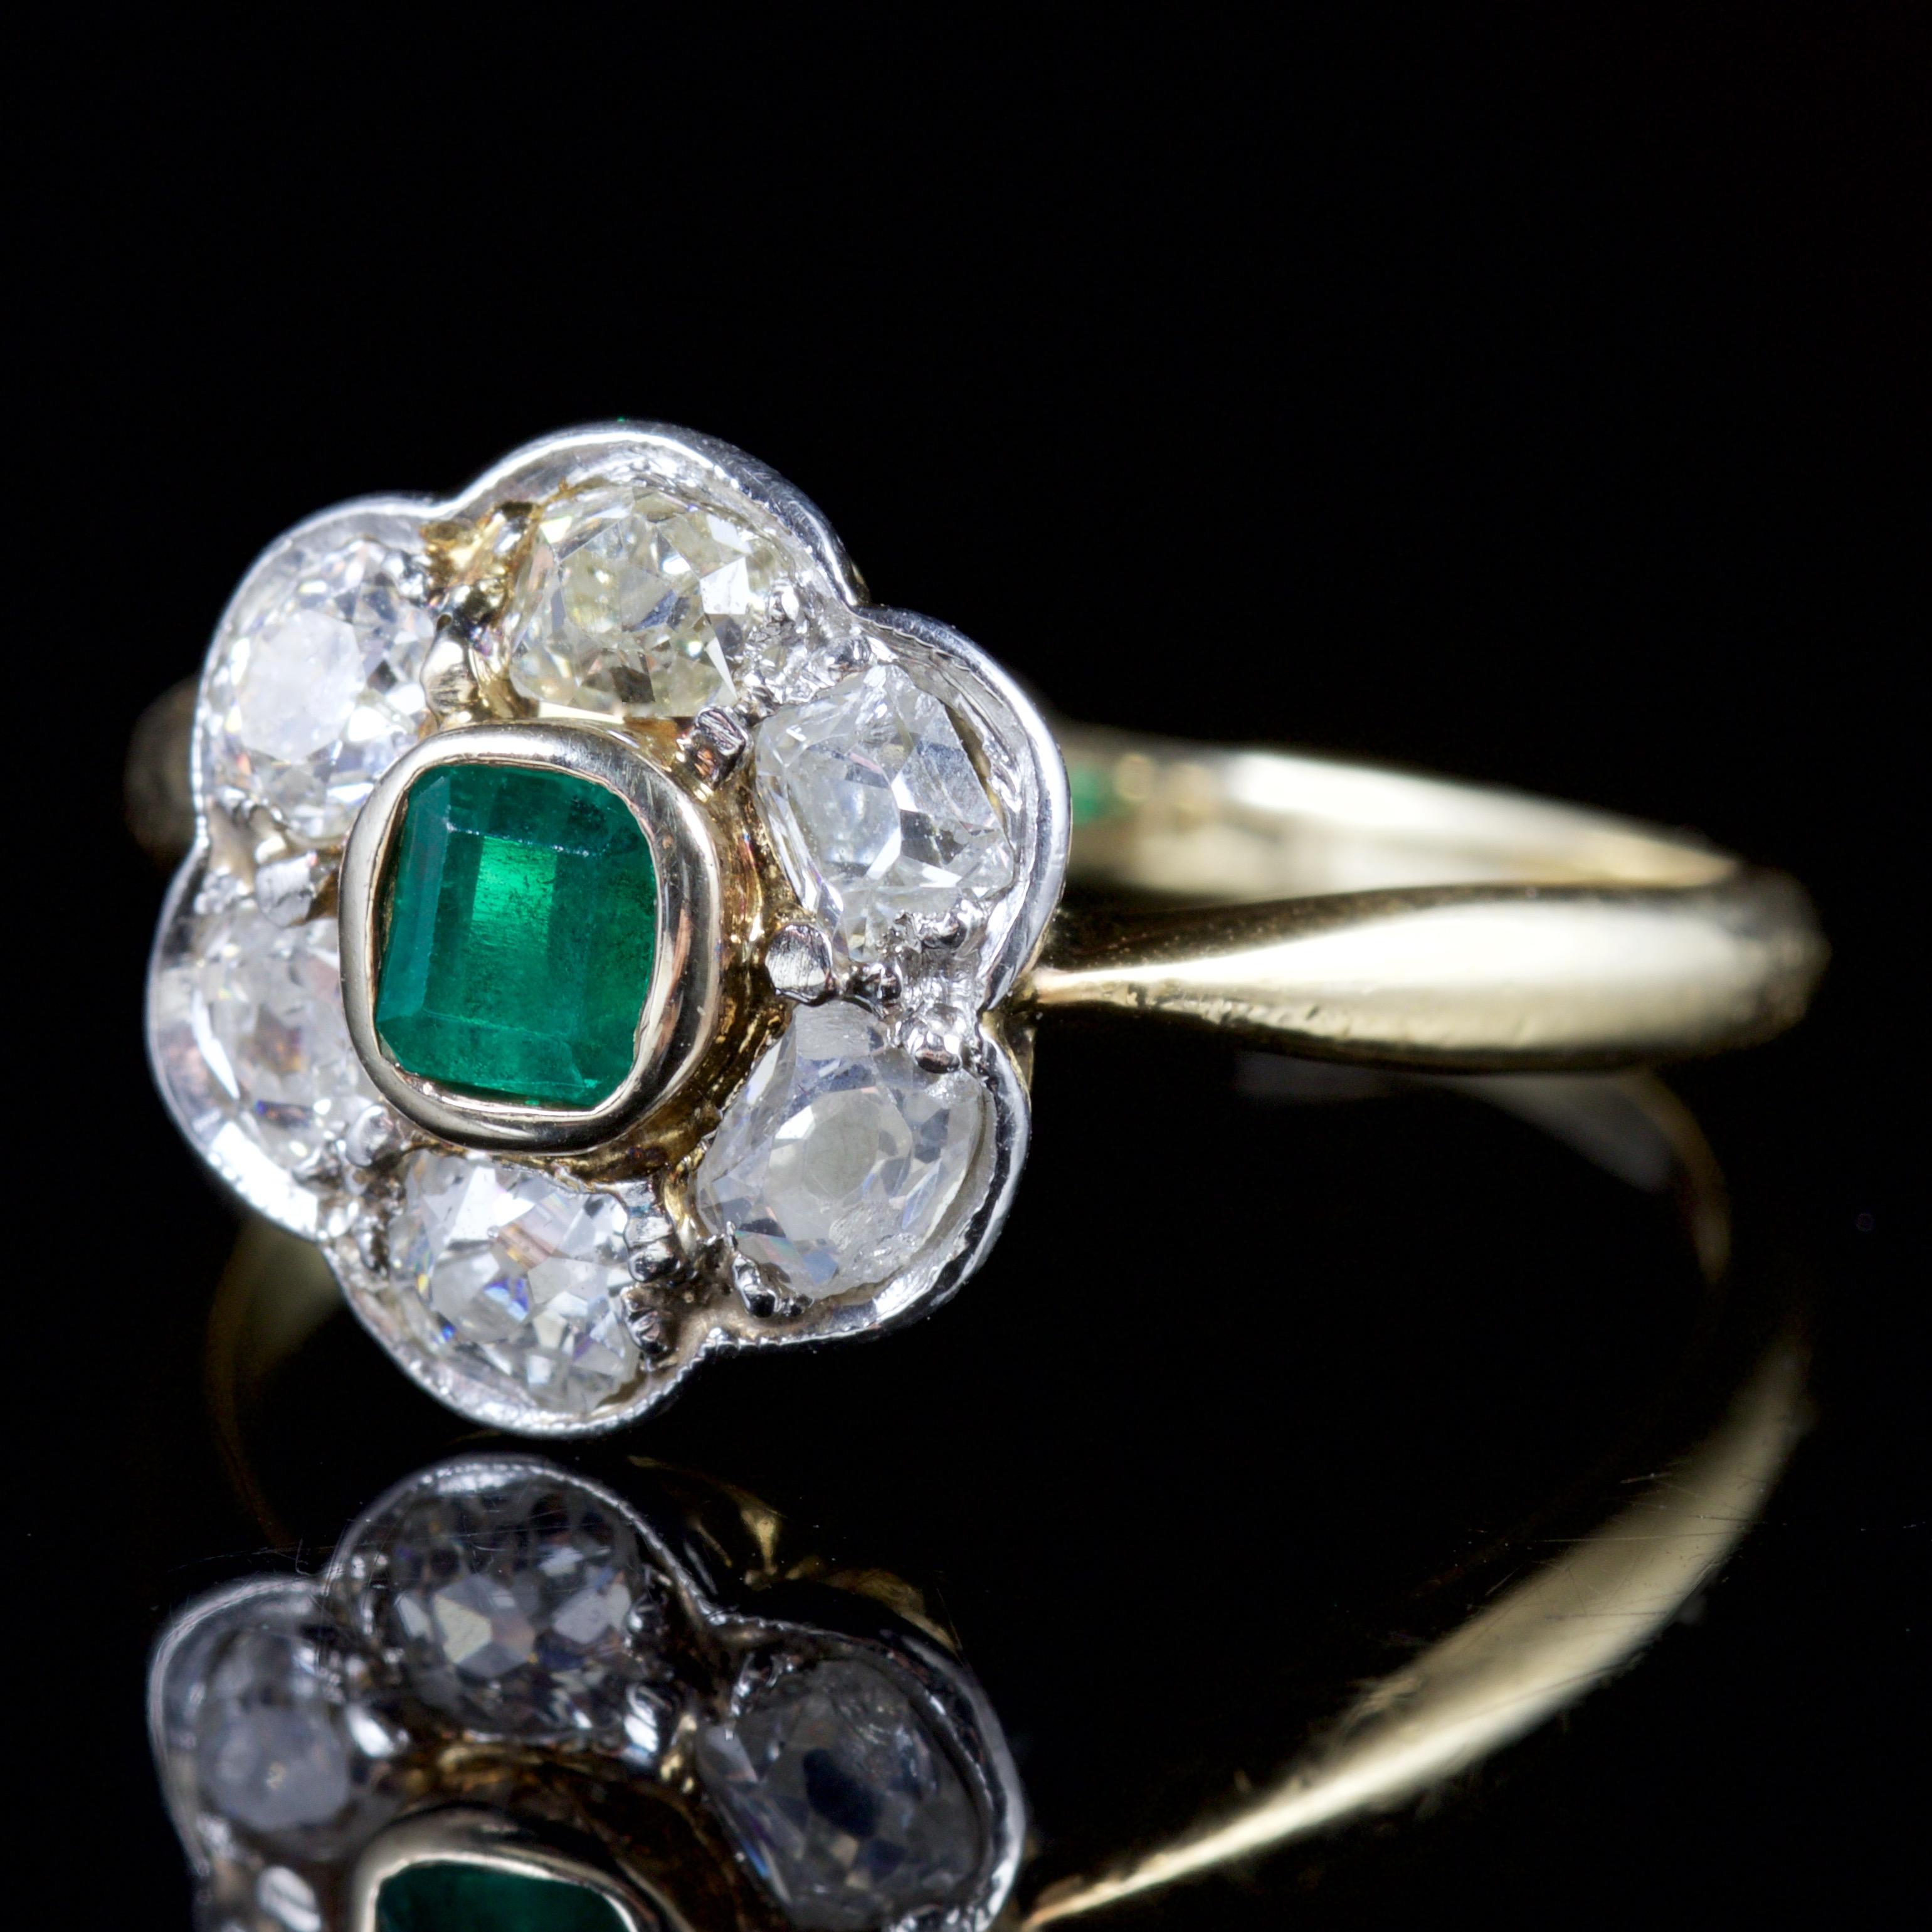 This spectacular Victorian Emerald and Diamond ring is set in 18ct Gold, Circa 1900.

The elegant ring is decorated in a deep, green Emerald which is 0.20ct showing a fabulous hue from within.

The Emerald is surrounded by a glistening halo of